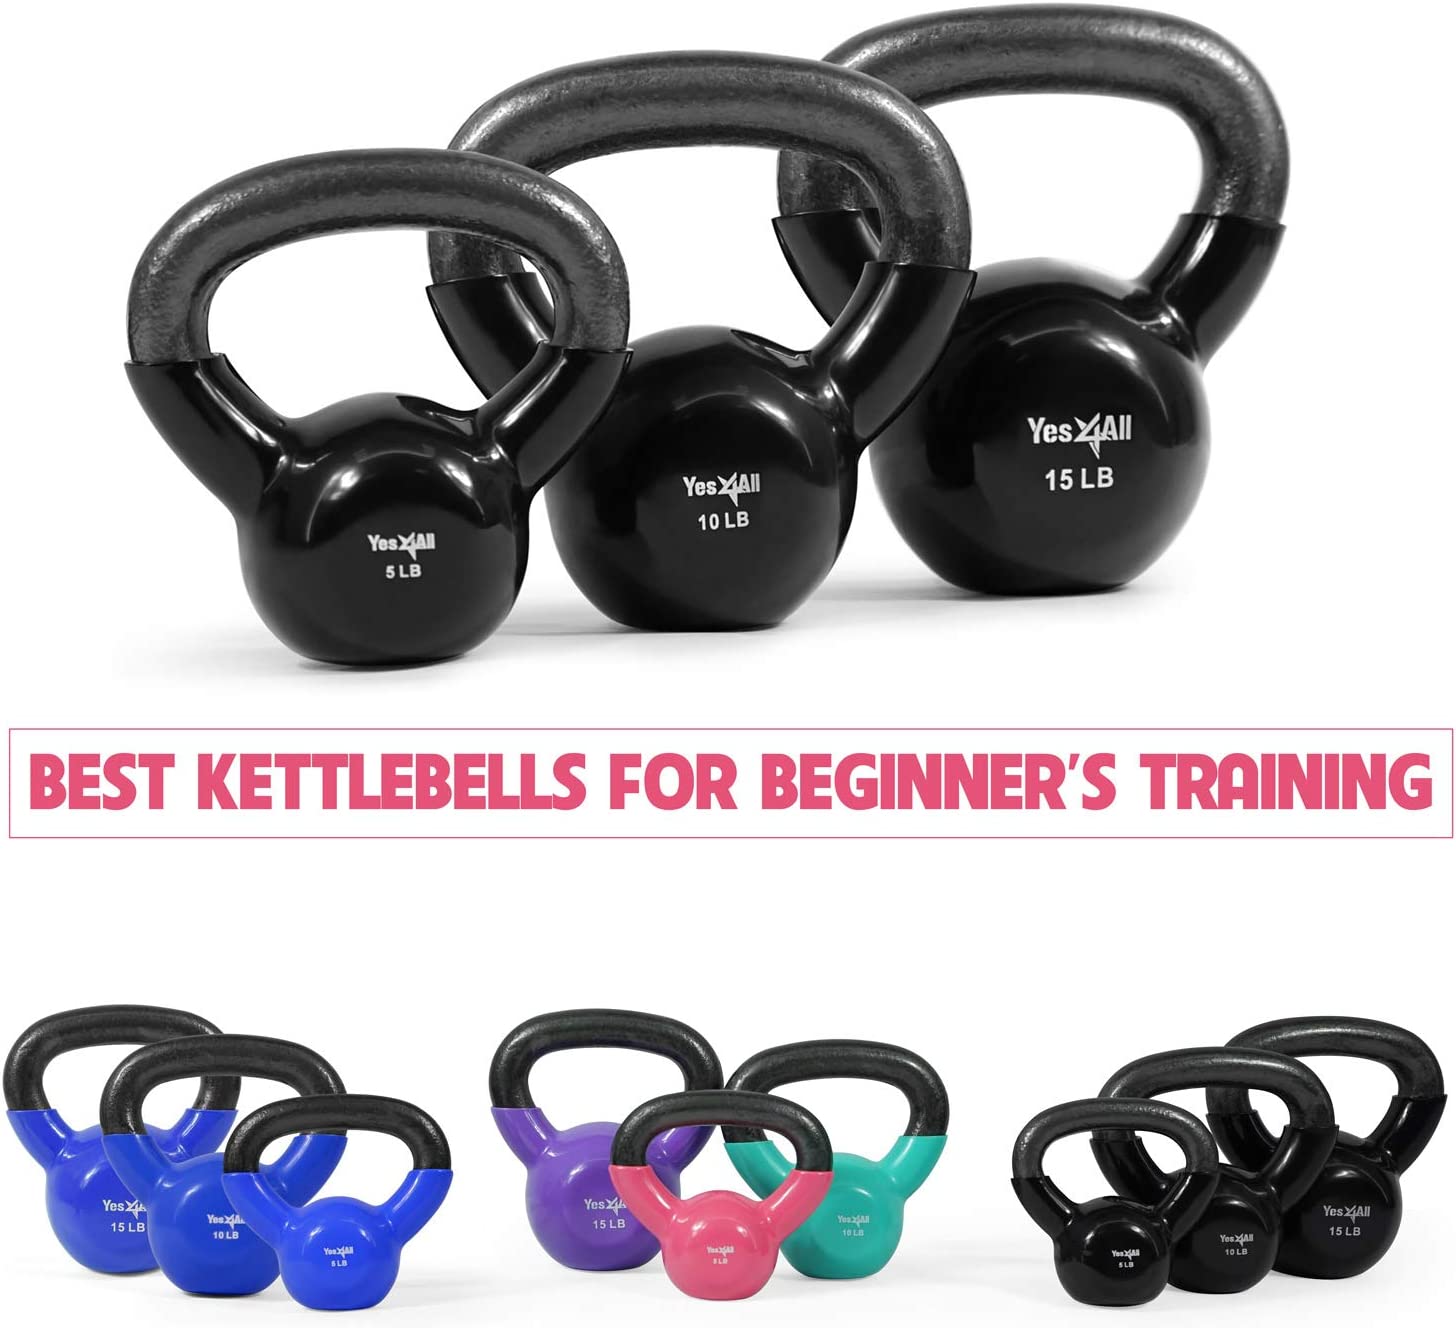 Yes4All 30 lb Vinyl Coated / PVC Kettlebell, Black, Combo / Set, Includes 5-15lb - image 3 of 8